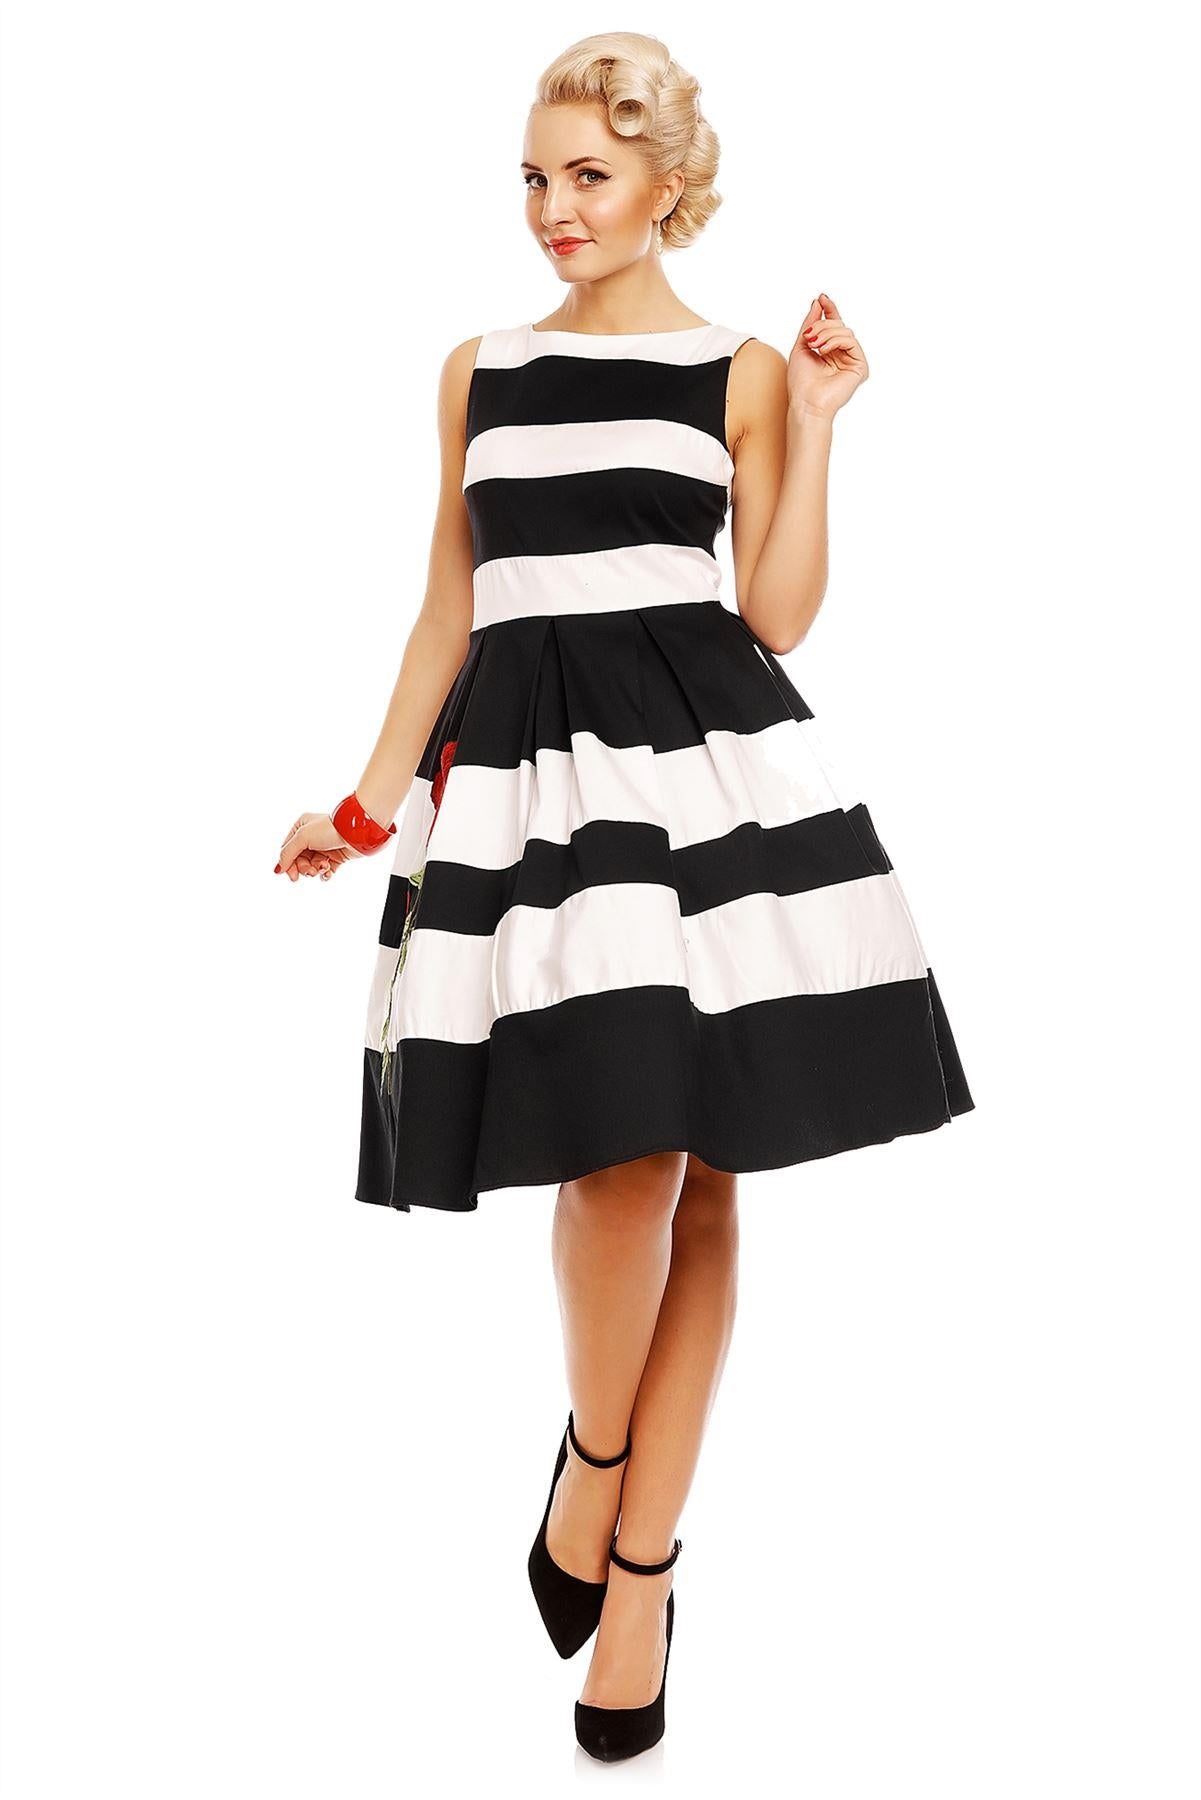 Model wears the black and white striped Annie swing dress, with embroidered red rose on the skirt, front view